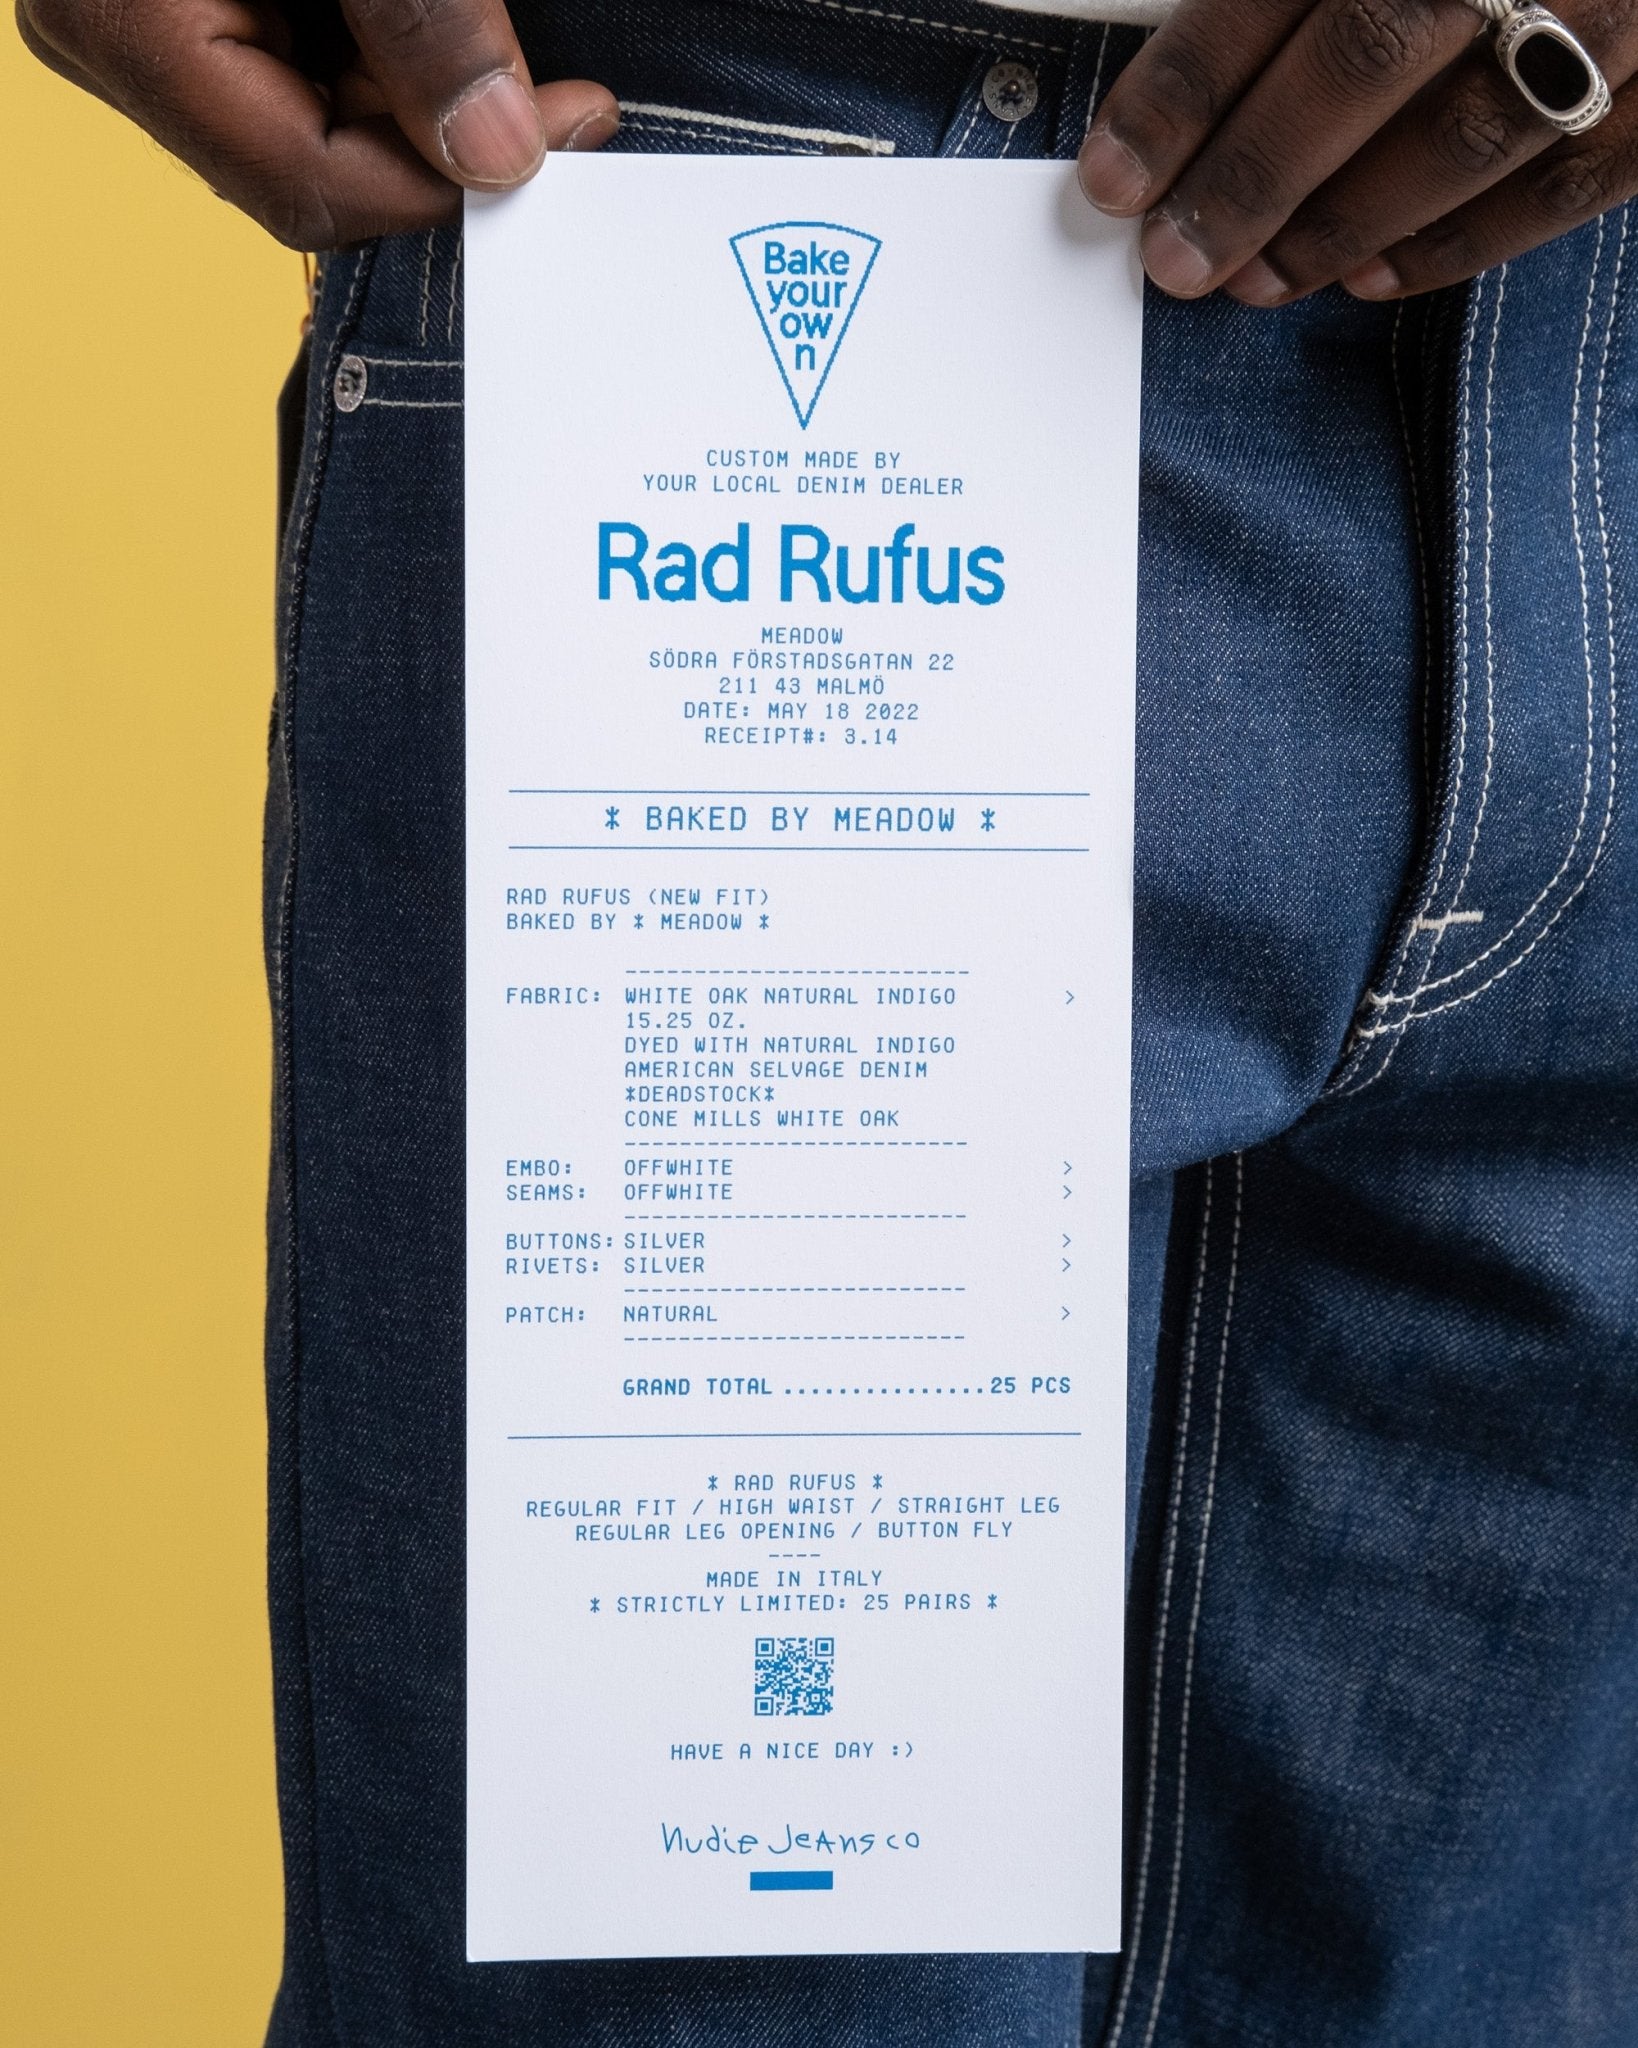 Rad Rufus By Meadow - Limited Edition - Meadow